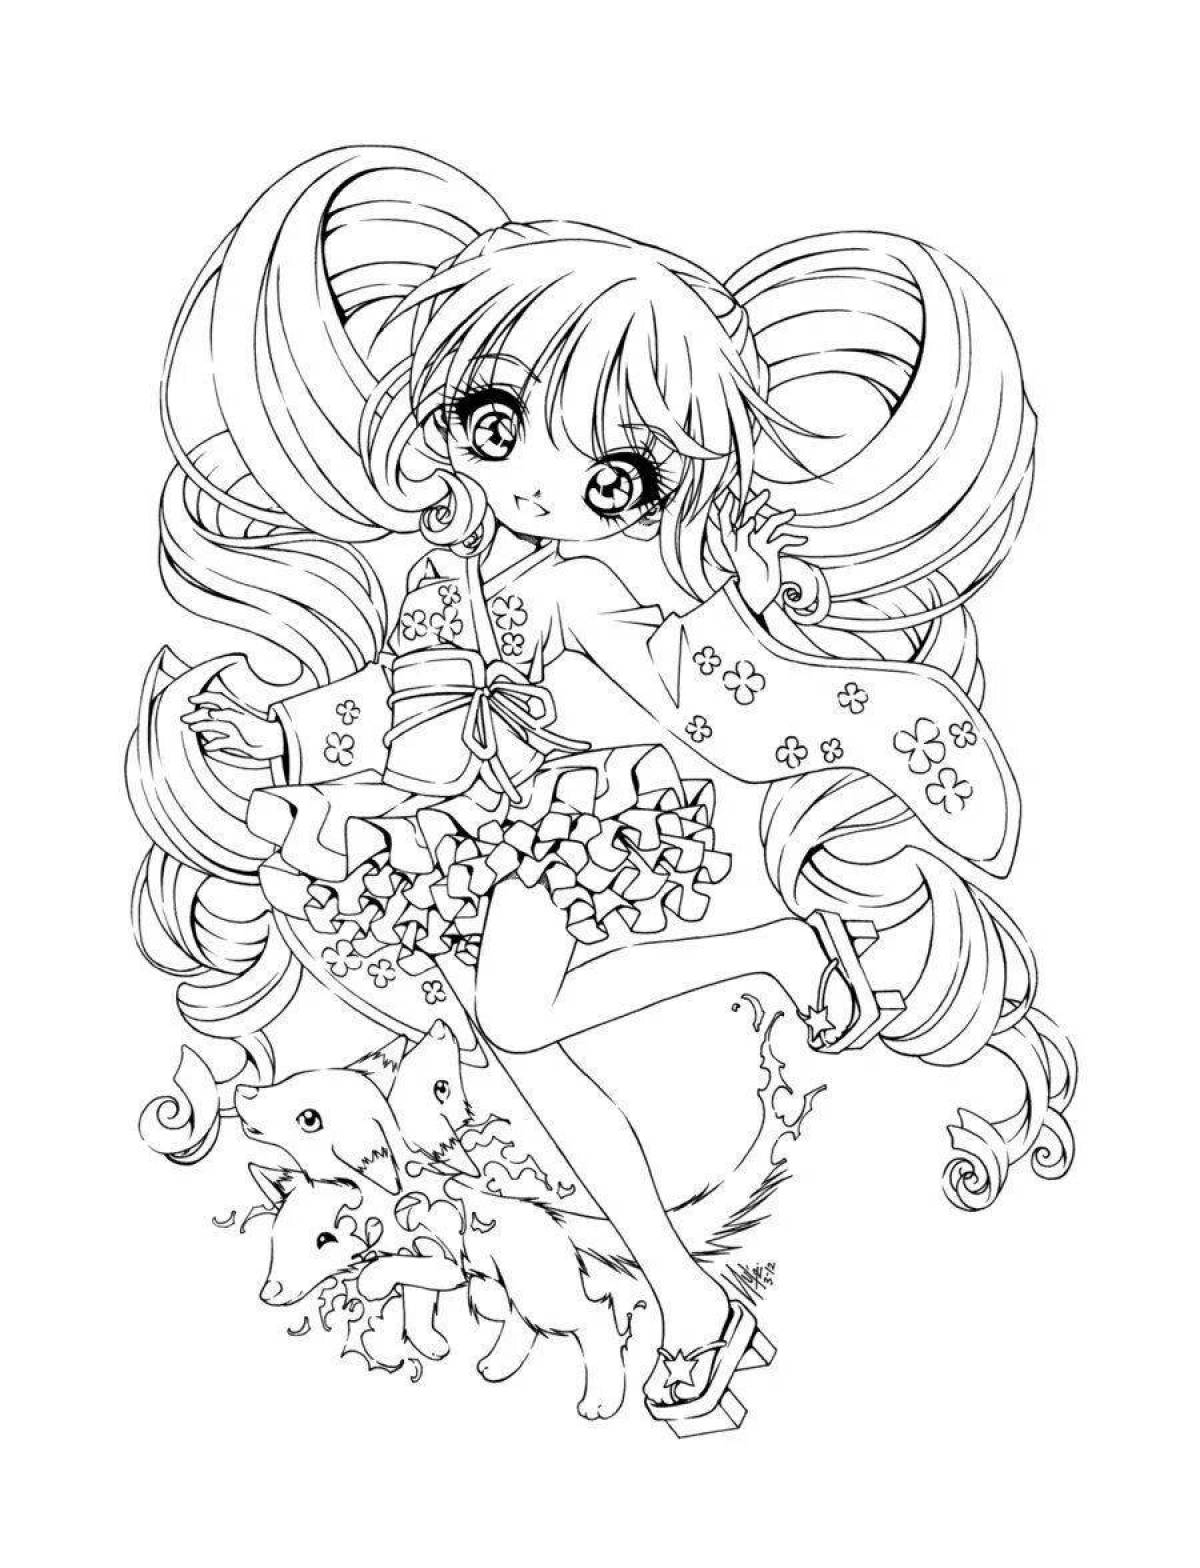 Delightful anime coloring book for girls